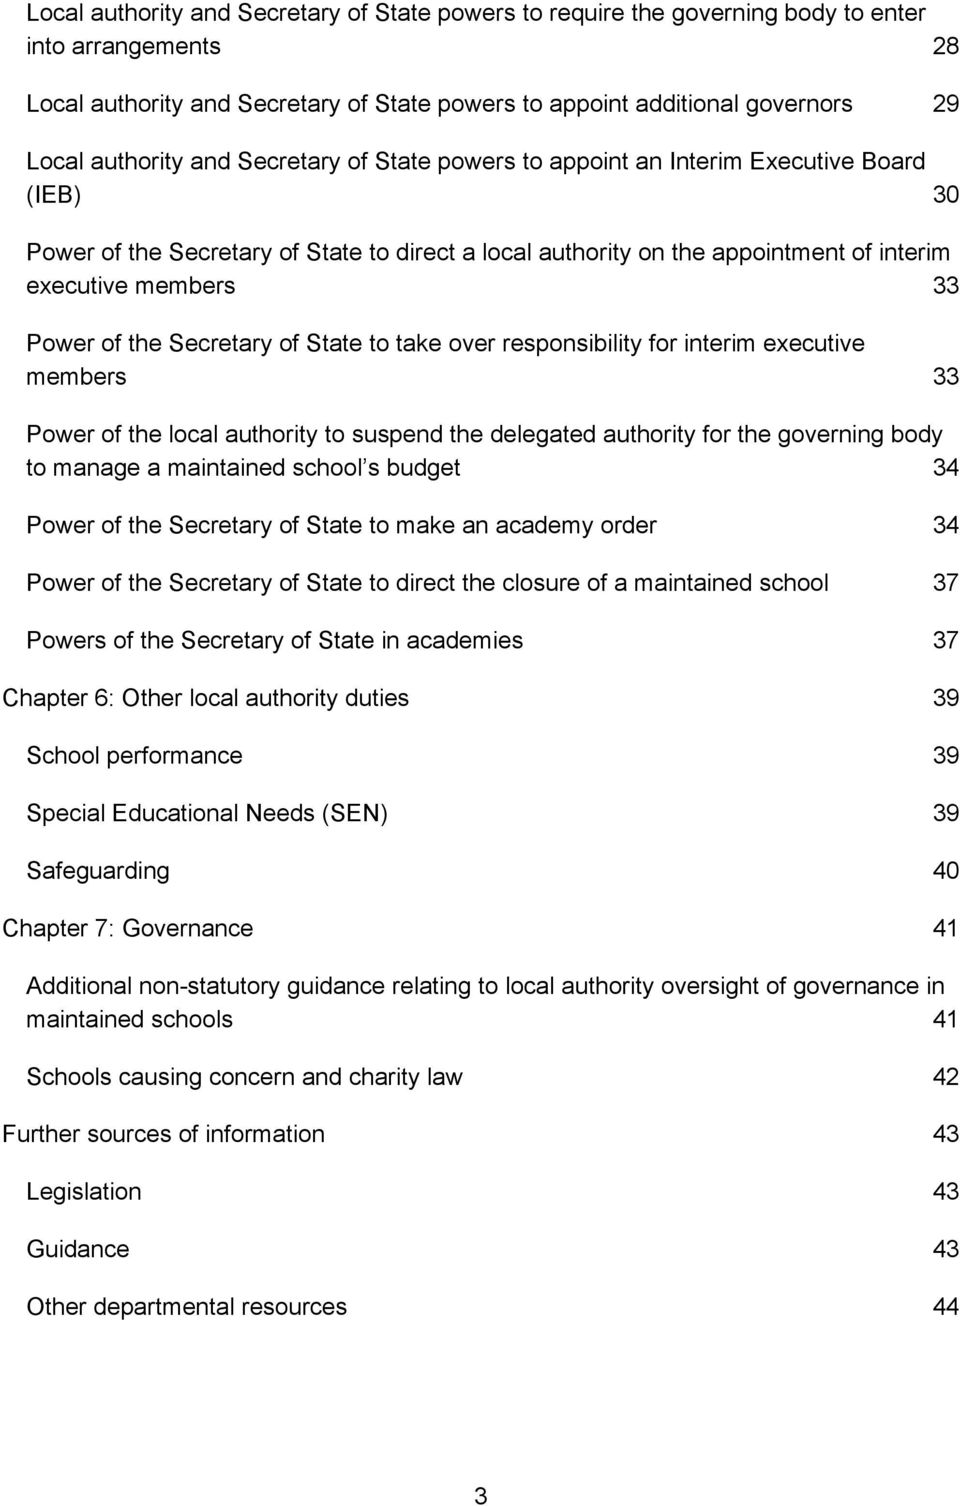 Power of the Secretary of State to take over responsibility for interim executive members 33 Power of the local authority to suspend the delegated authority for the governing body to manage a